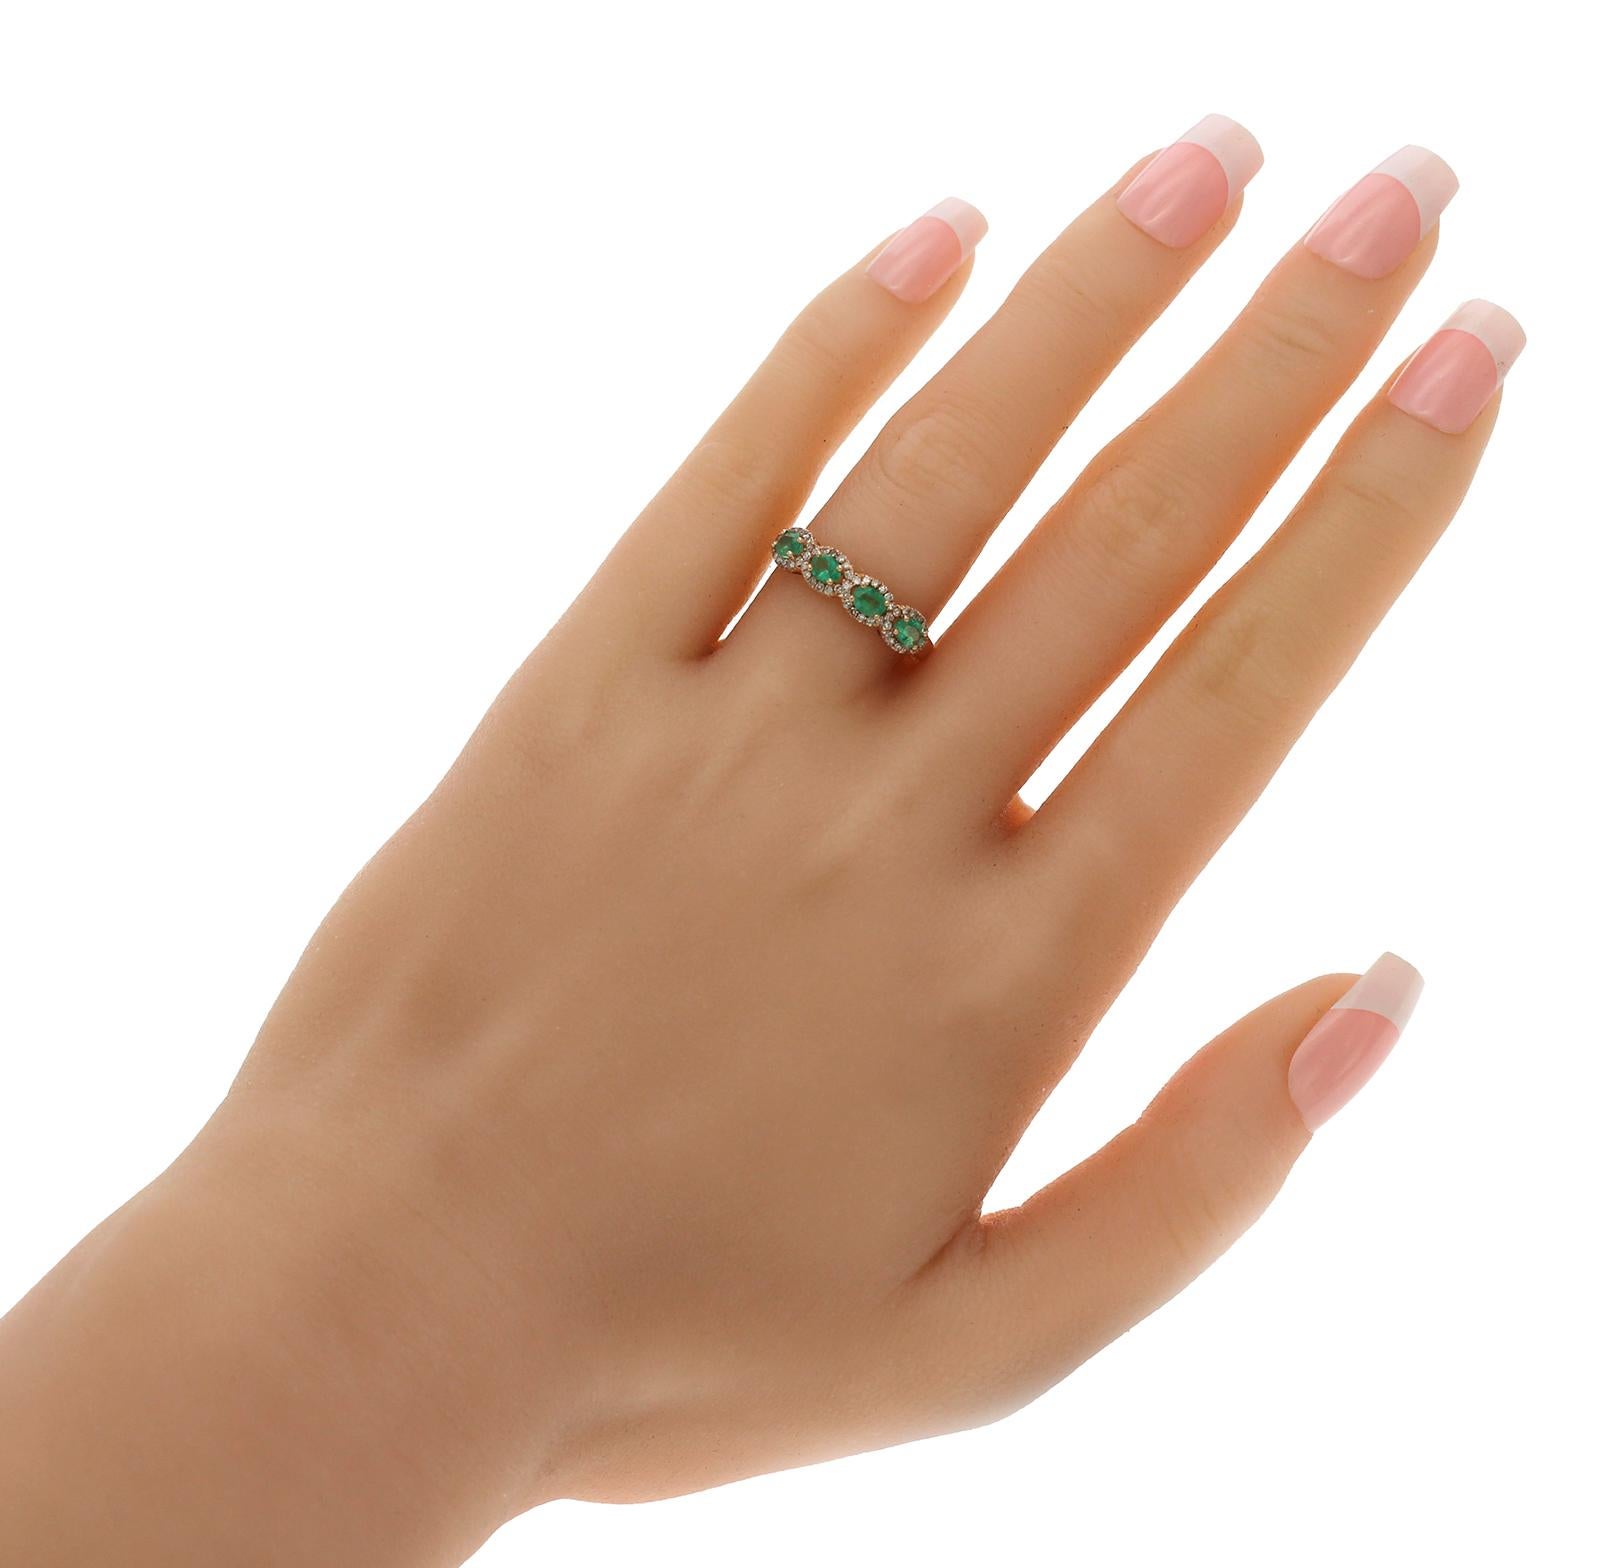 100% Authentic, 100% Customer Satisfaction

Height: 5 mm

Width: 1.8 mm

Size: 7

Metal:14K Rose Gold

Hallmarks: 14K

Total Weight: 2 Grams

Stone Type: 0.40 CT Natural Colombian Emerald & 0.24 CT Diamonds

Condition: New

Estimated Price: